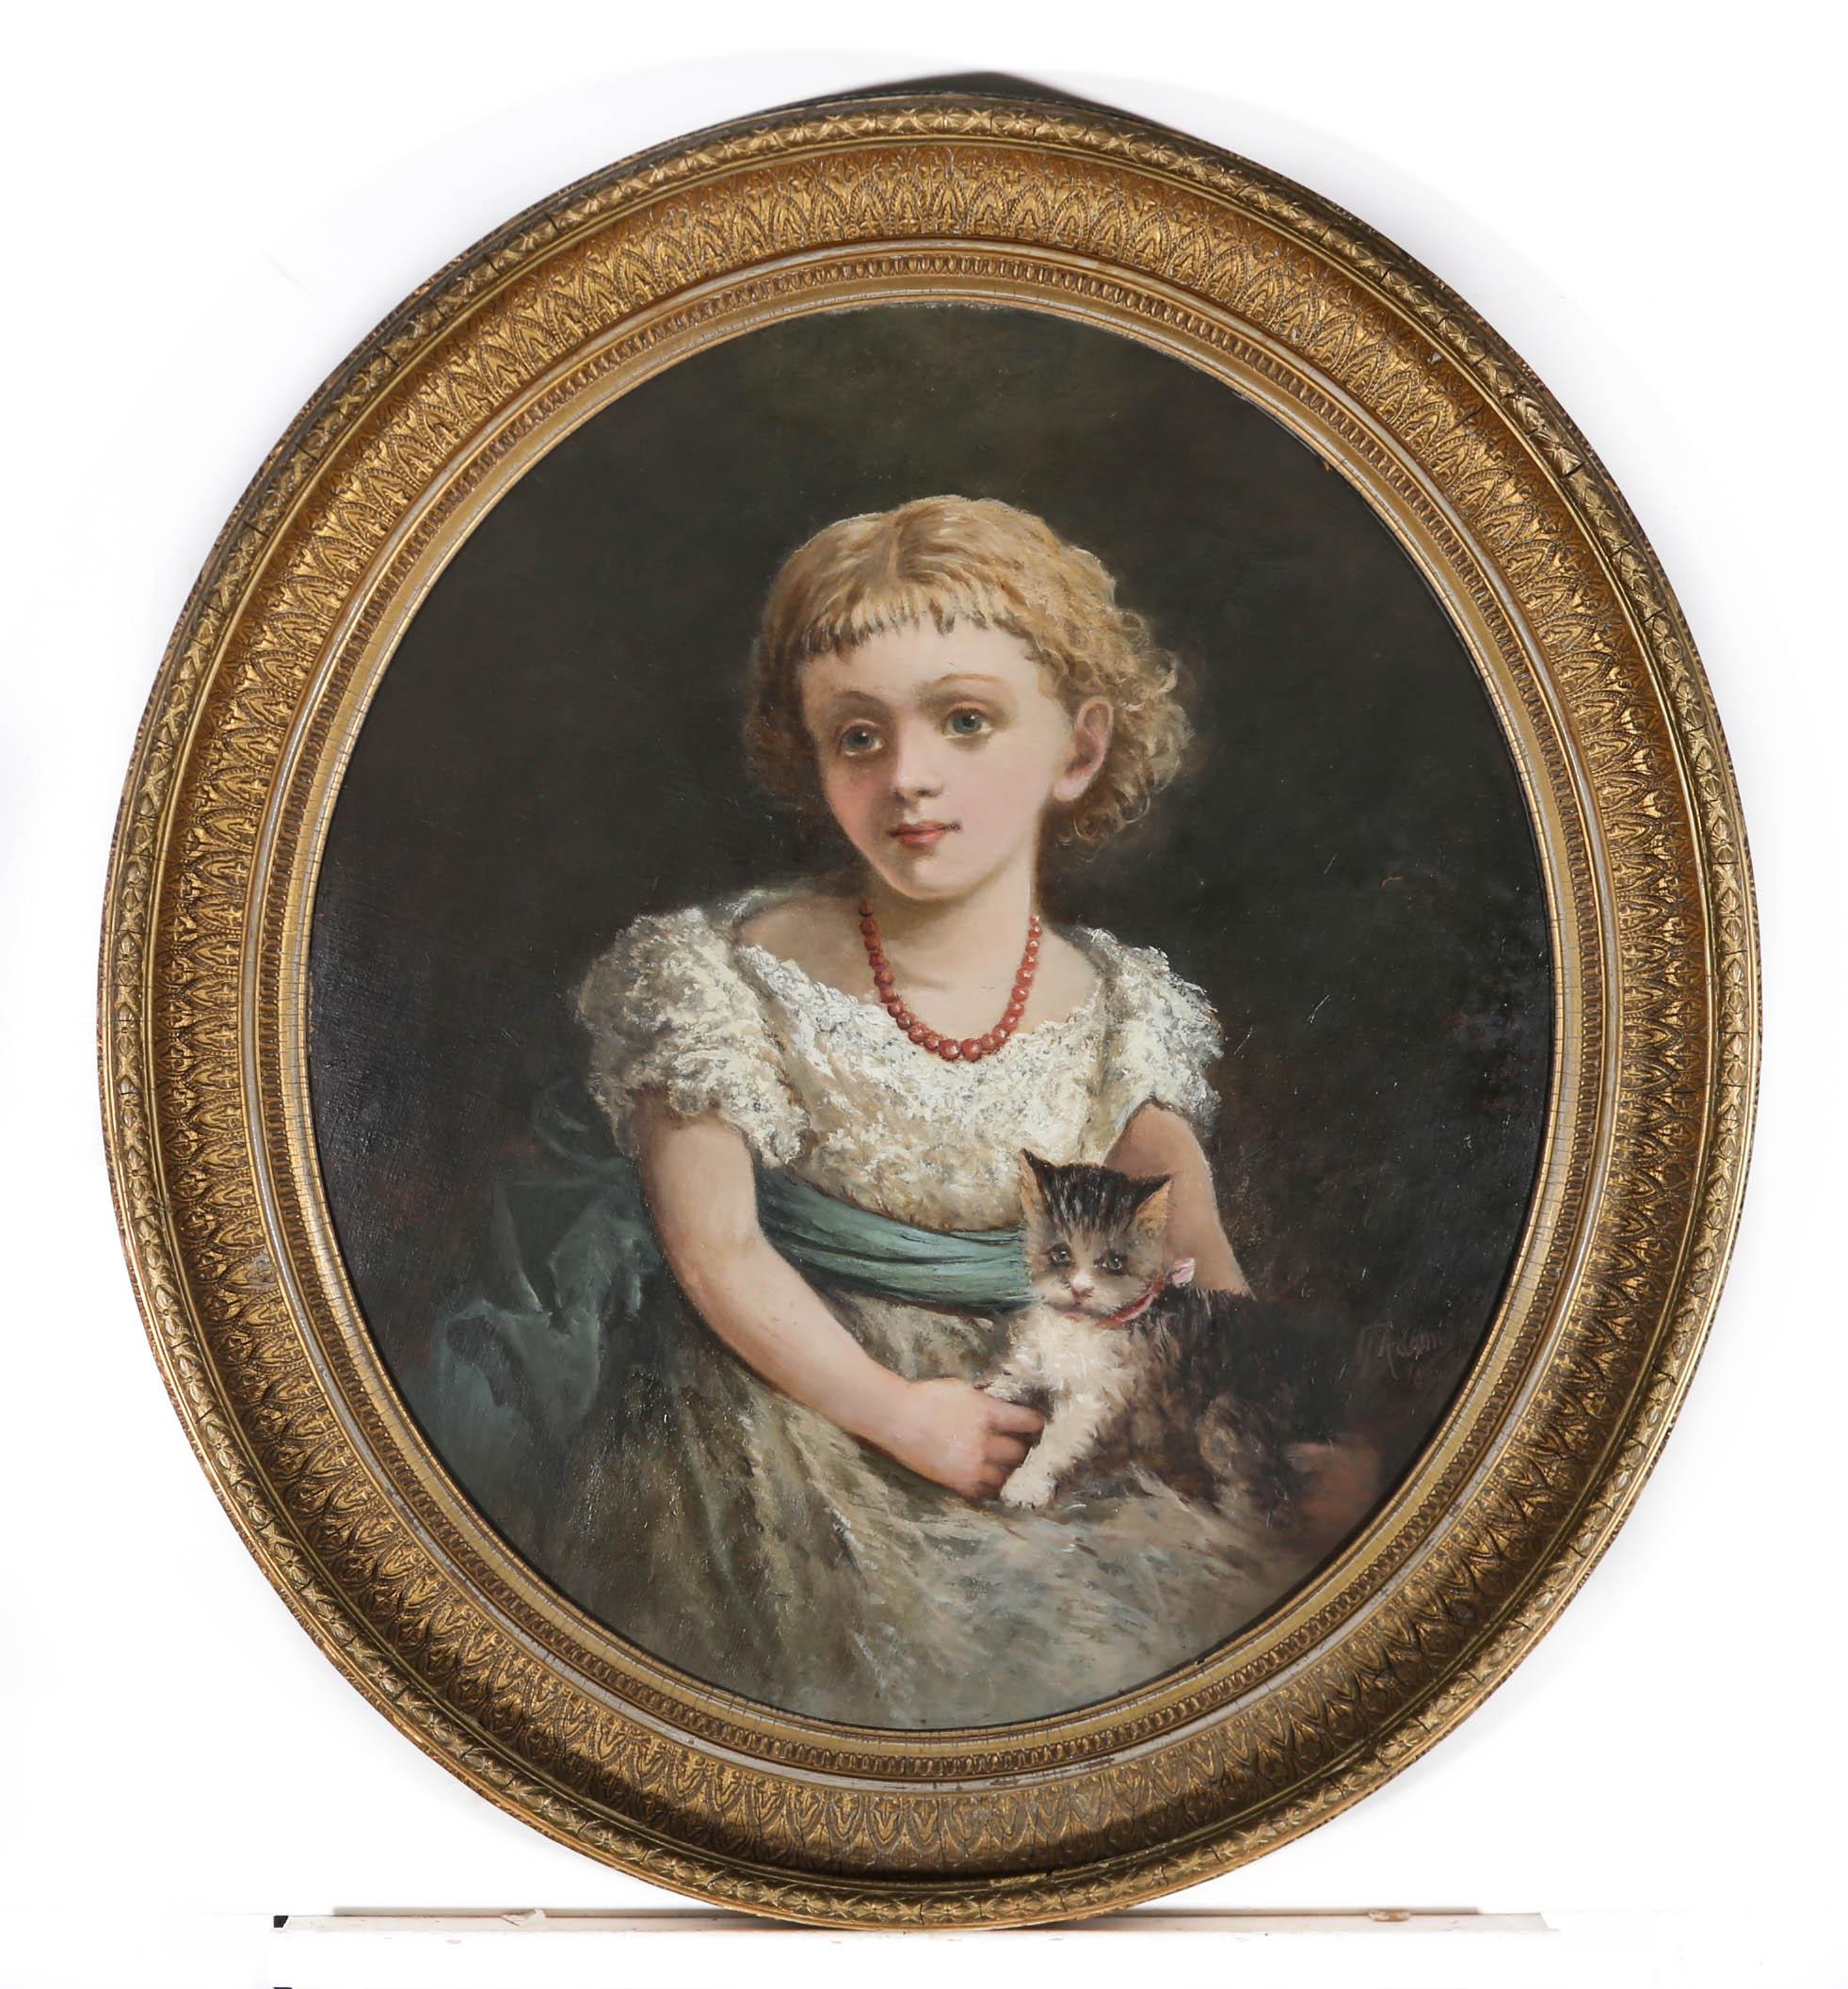 An angelic portrait of a young Victorian child, captured alongside her beloved, pink collared, tabby cat. The artist has caught the sitter wearing a beautiful bobble white dress and blue sash, with elegant ruby pearls. The kitten looks startled by